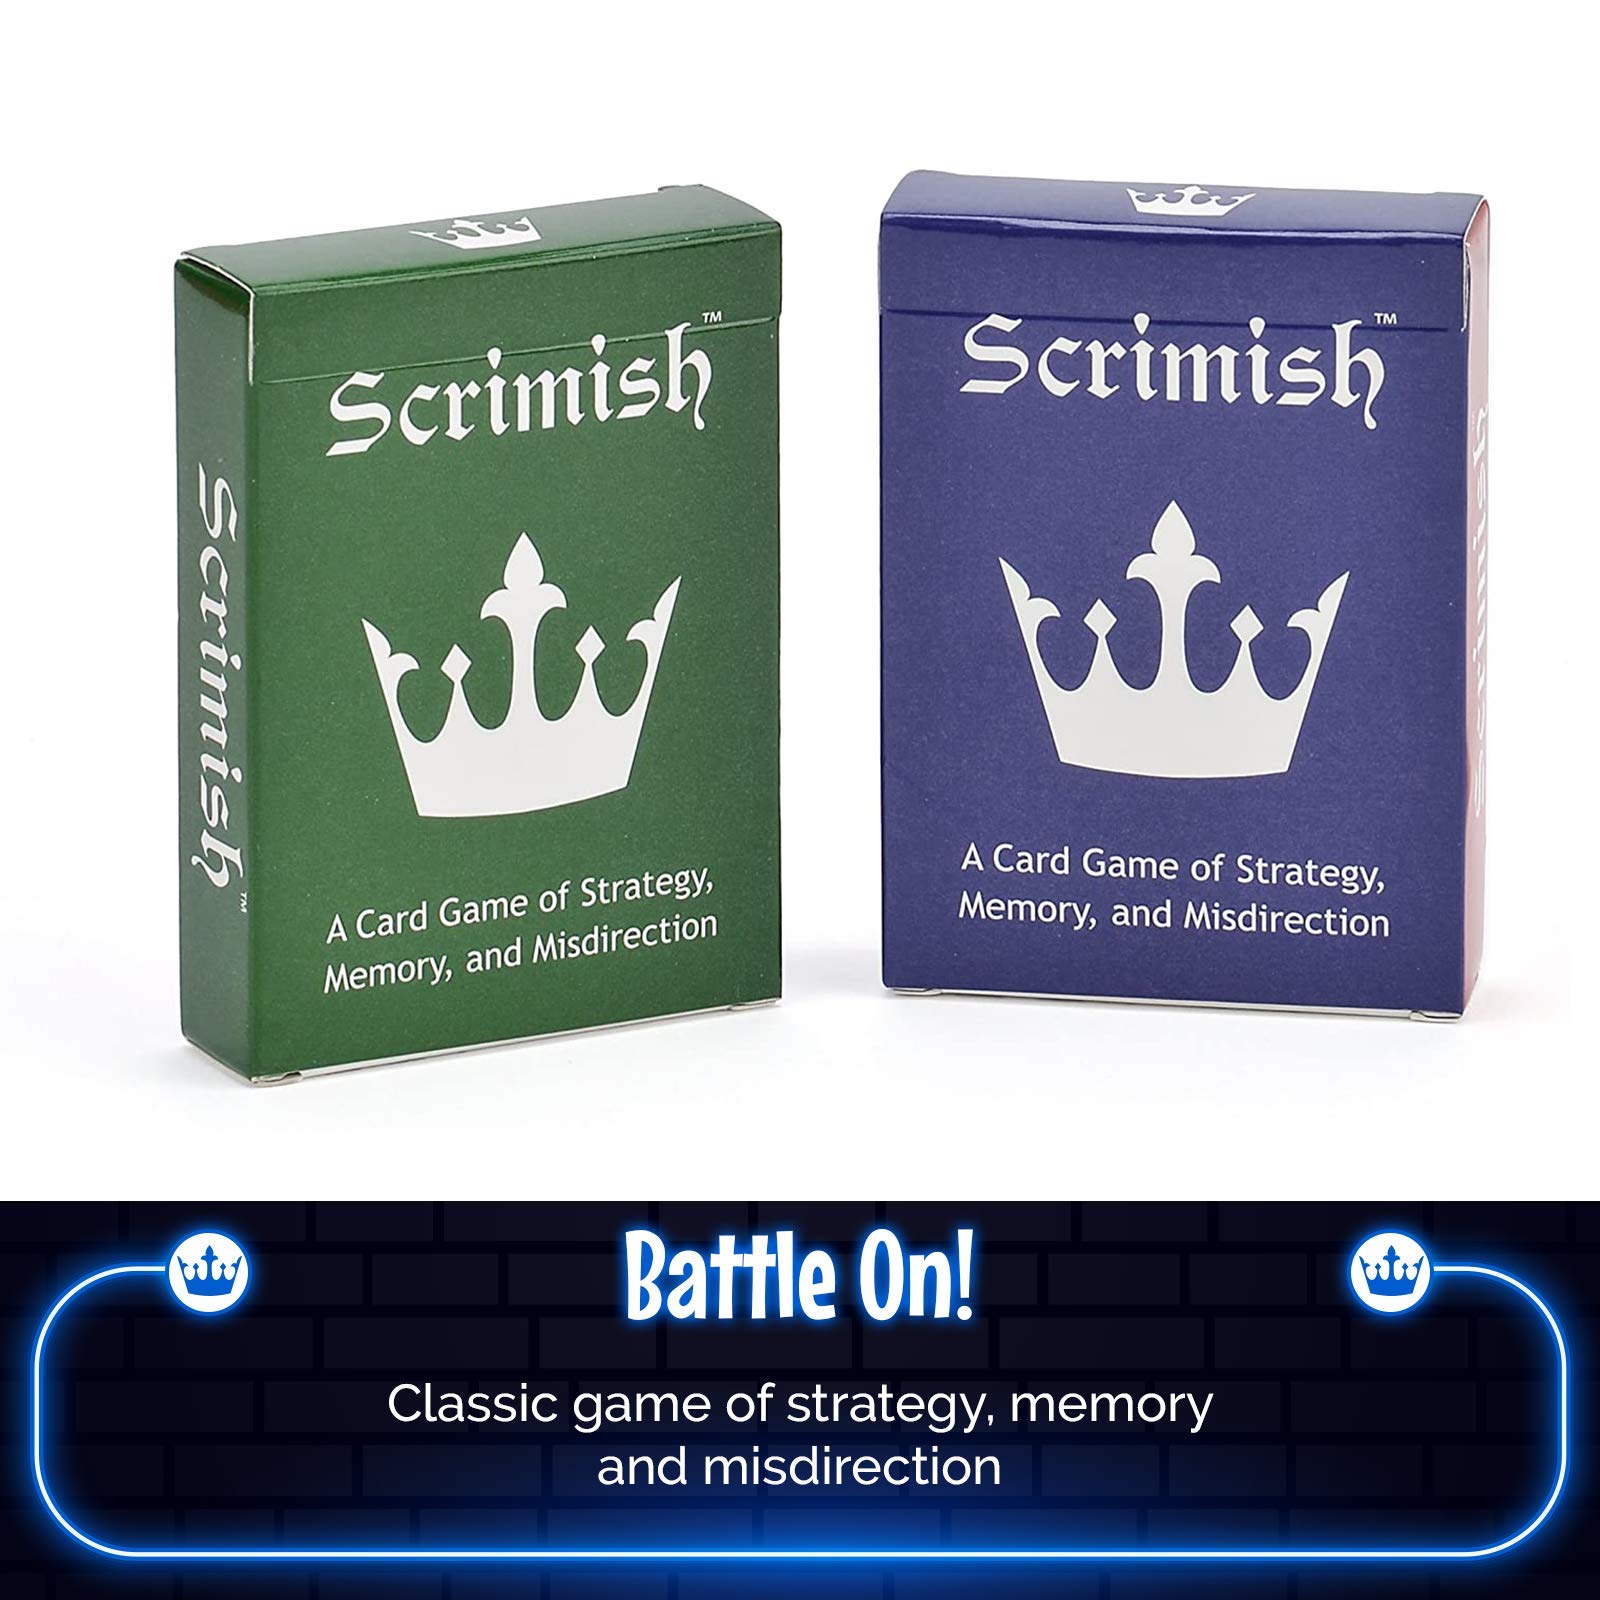 Nexci Scrimish Card Game - 2 Pack Strategy Games for Up to 4 Players Including Adults, Teens, Kids and Families That is Easy to Learn and Fun to Play